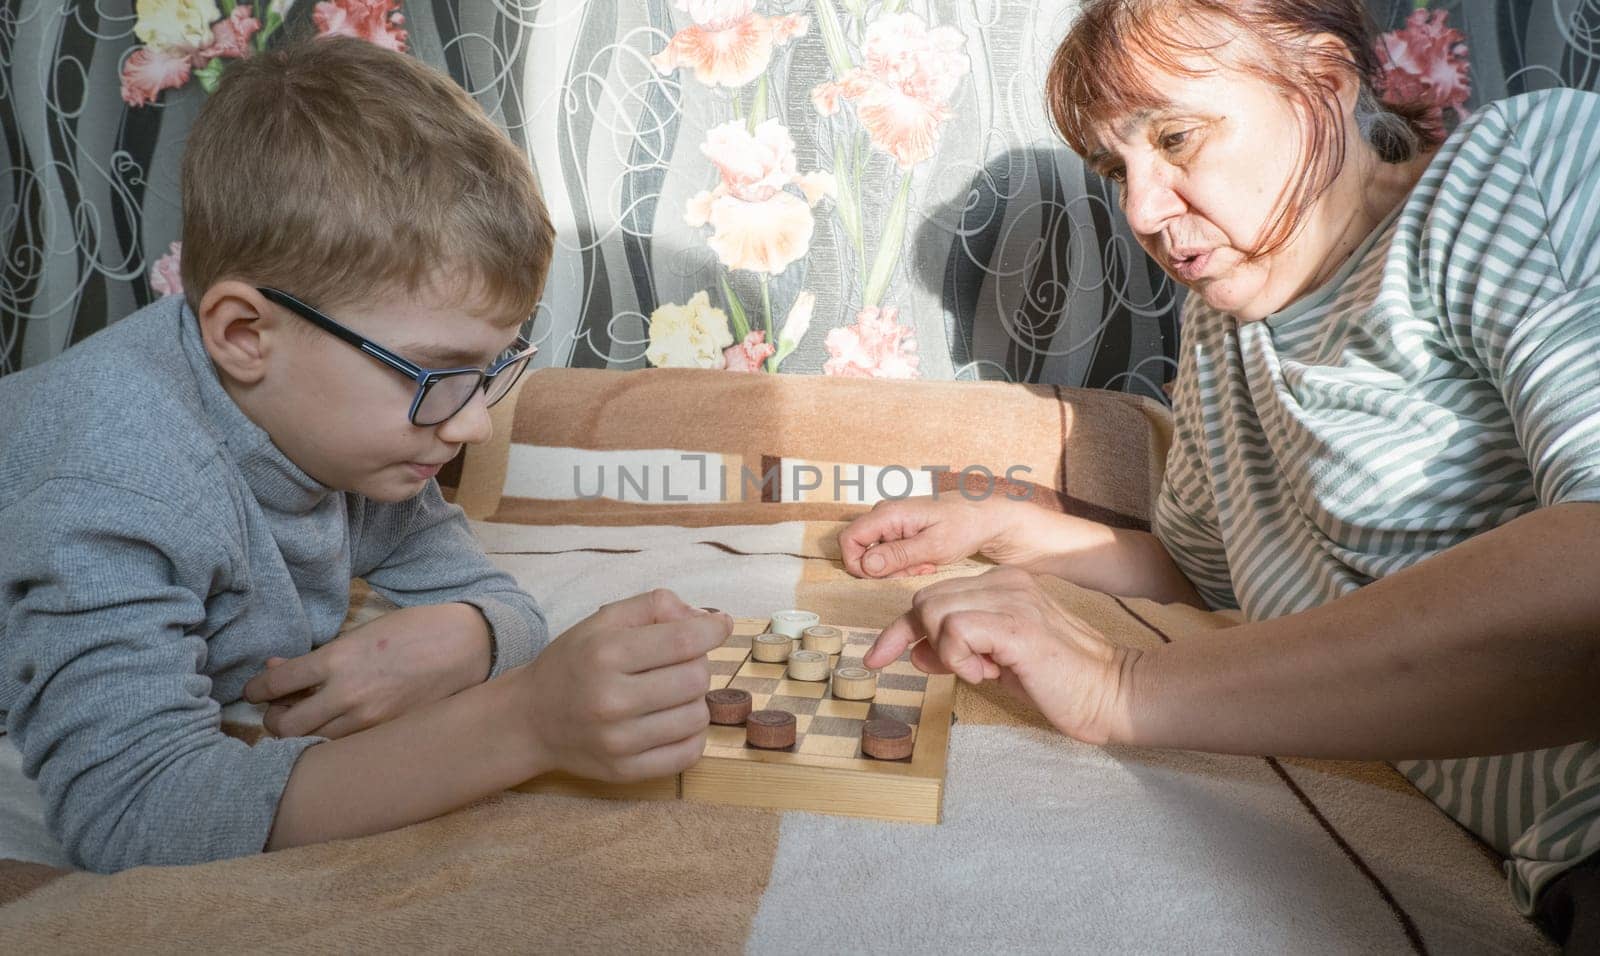 A caring middle-aged grandmother plays checkers with a child, a boy, lying on the bed. Happy family enjoying an interesting wooden board game at home